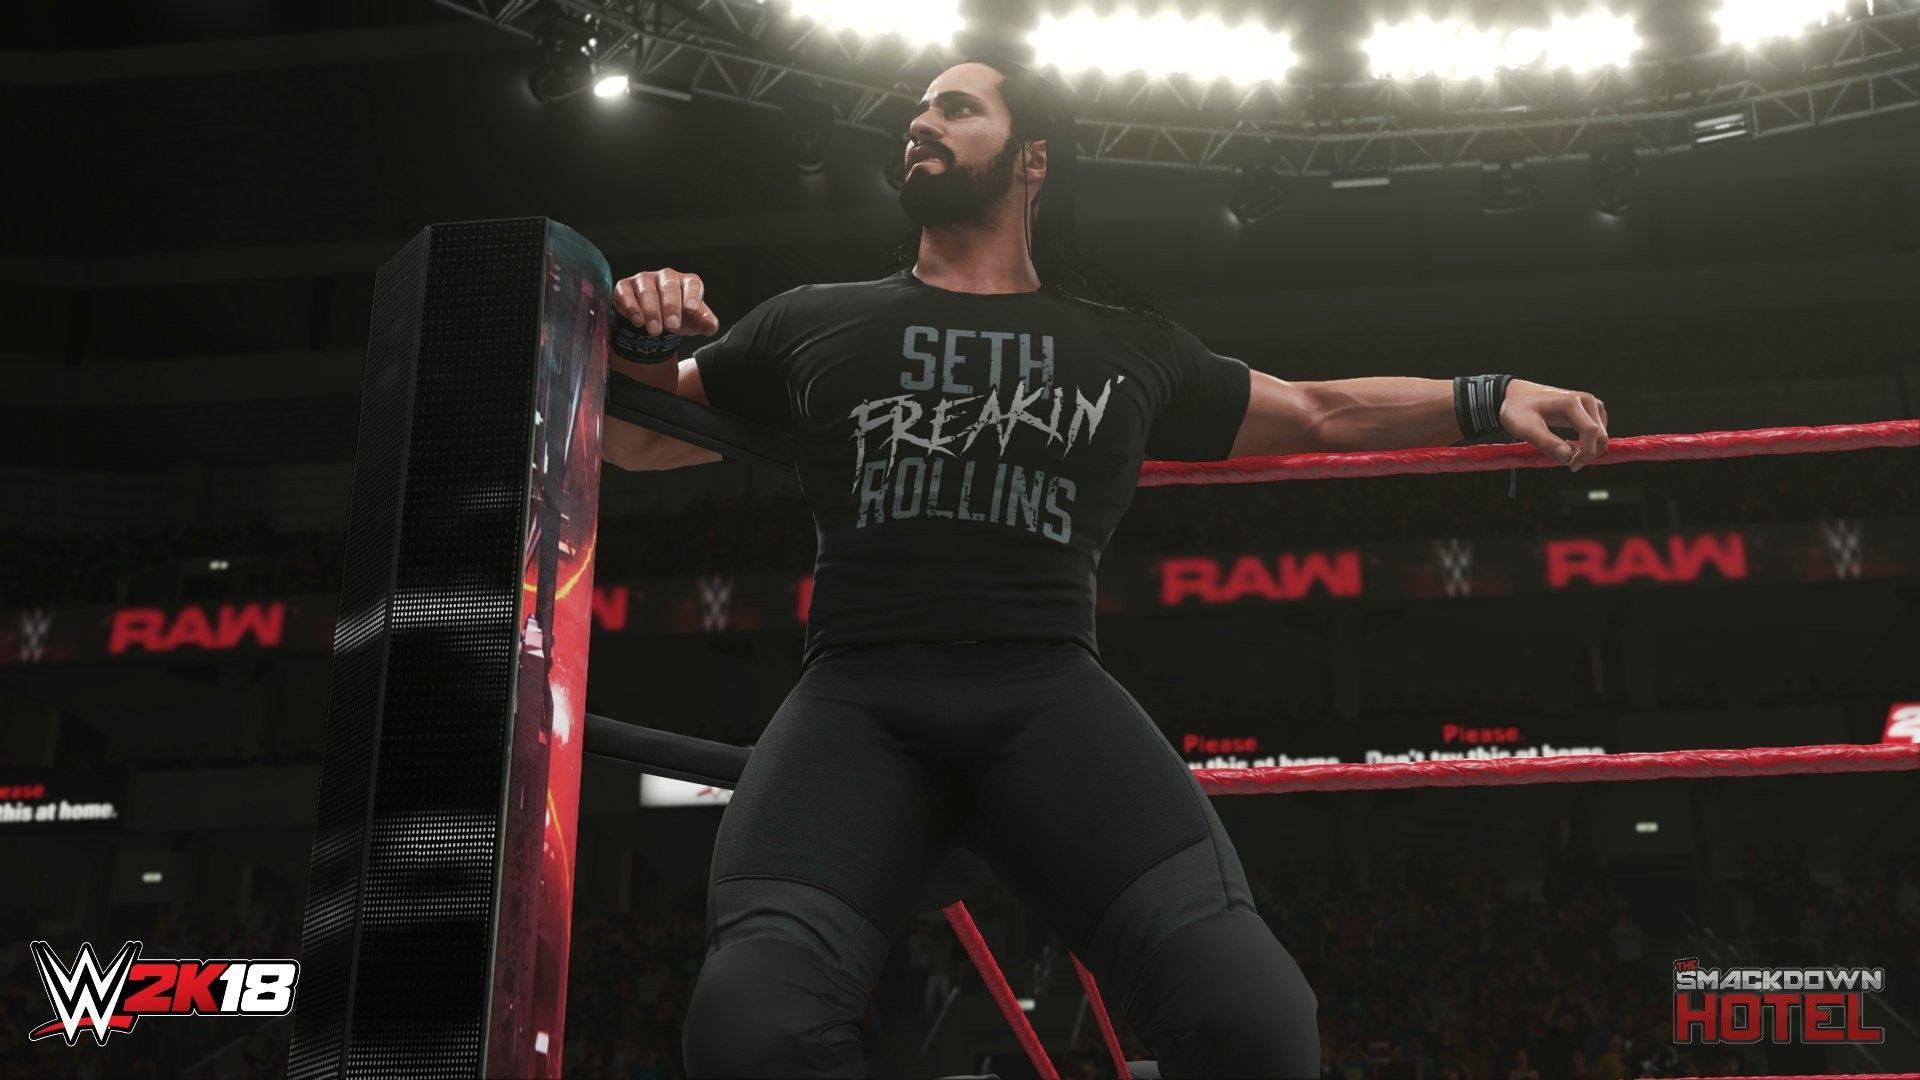 First Official WWE 2K18 SCREENSHOTS with Seth Rollins in new Raw